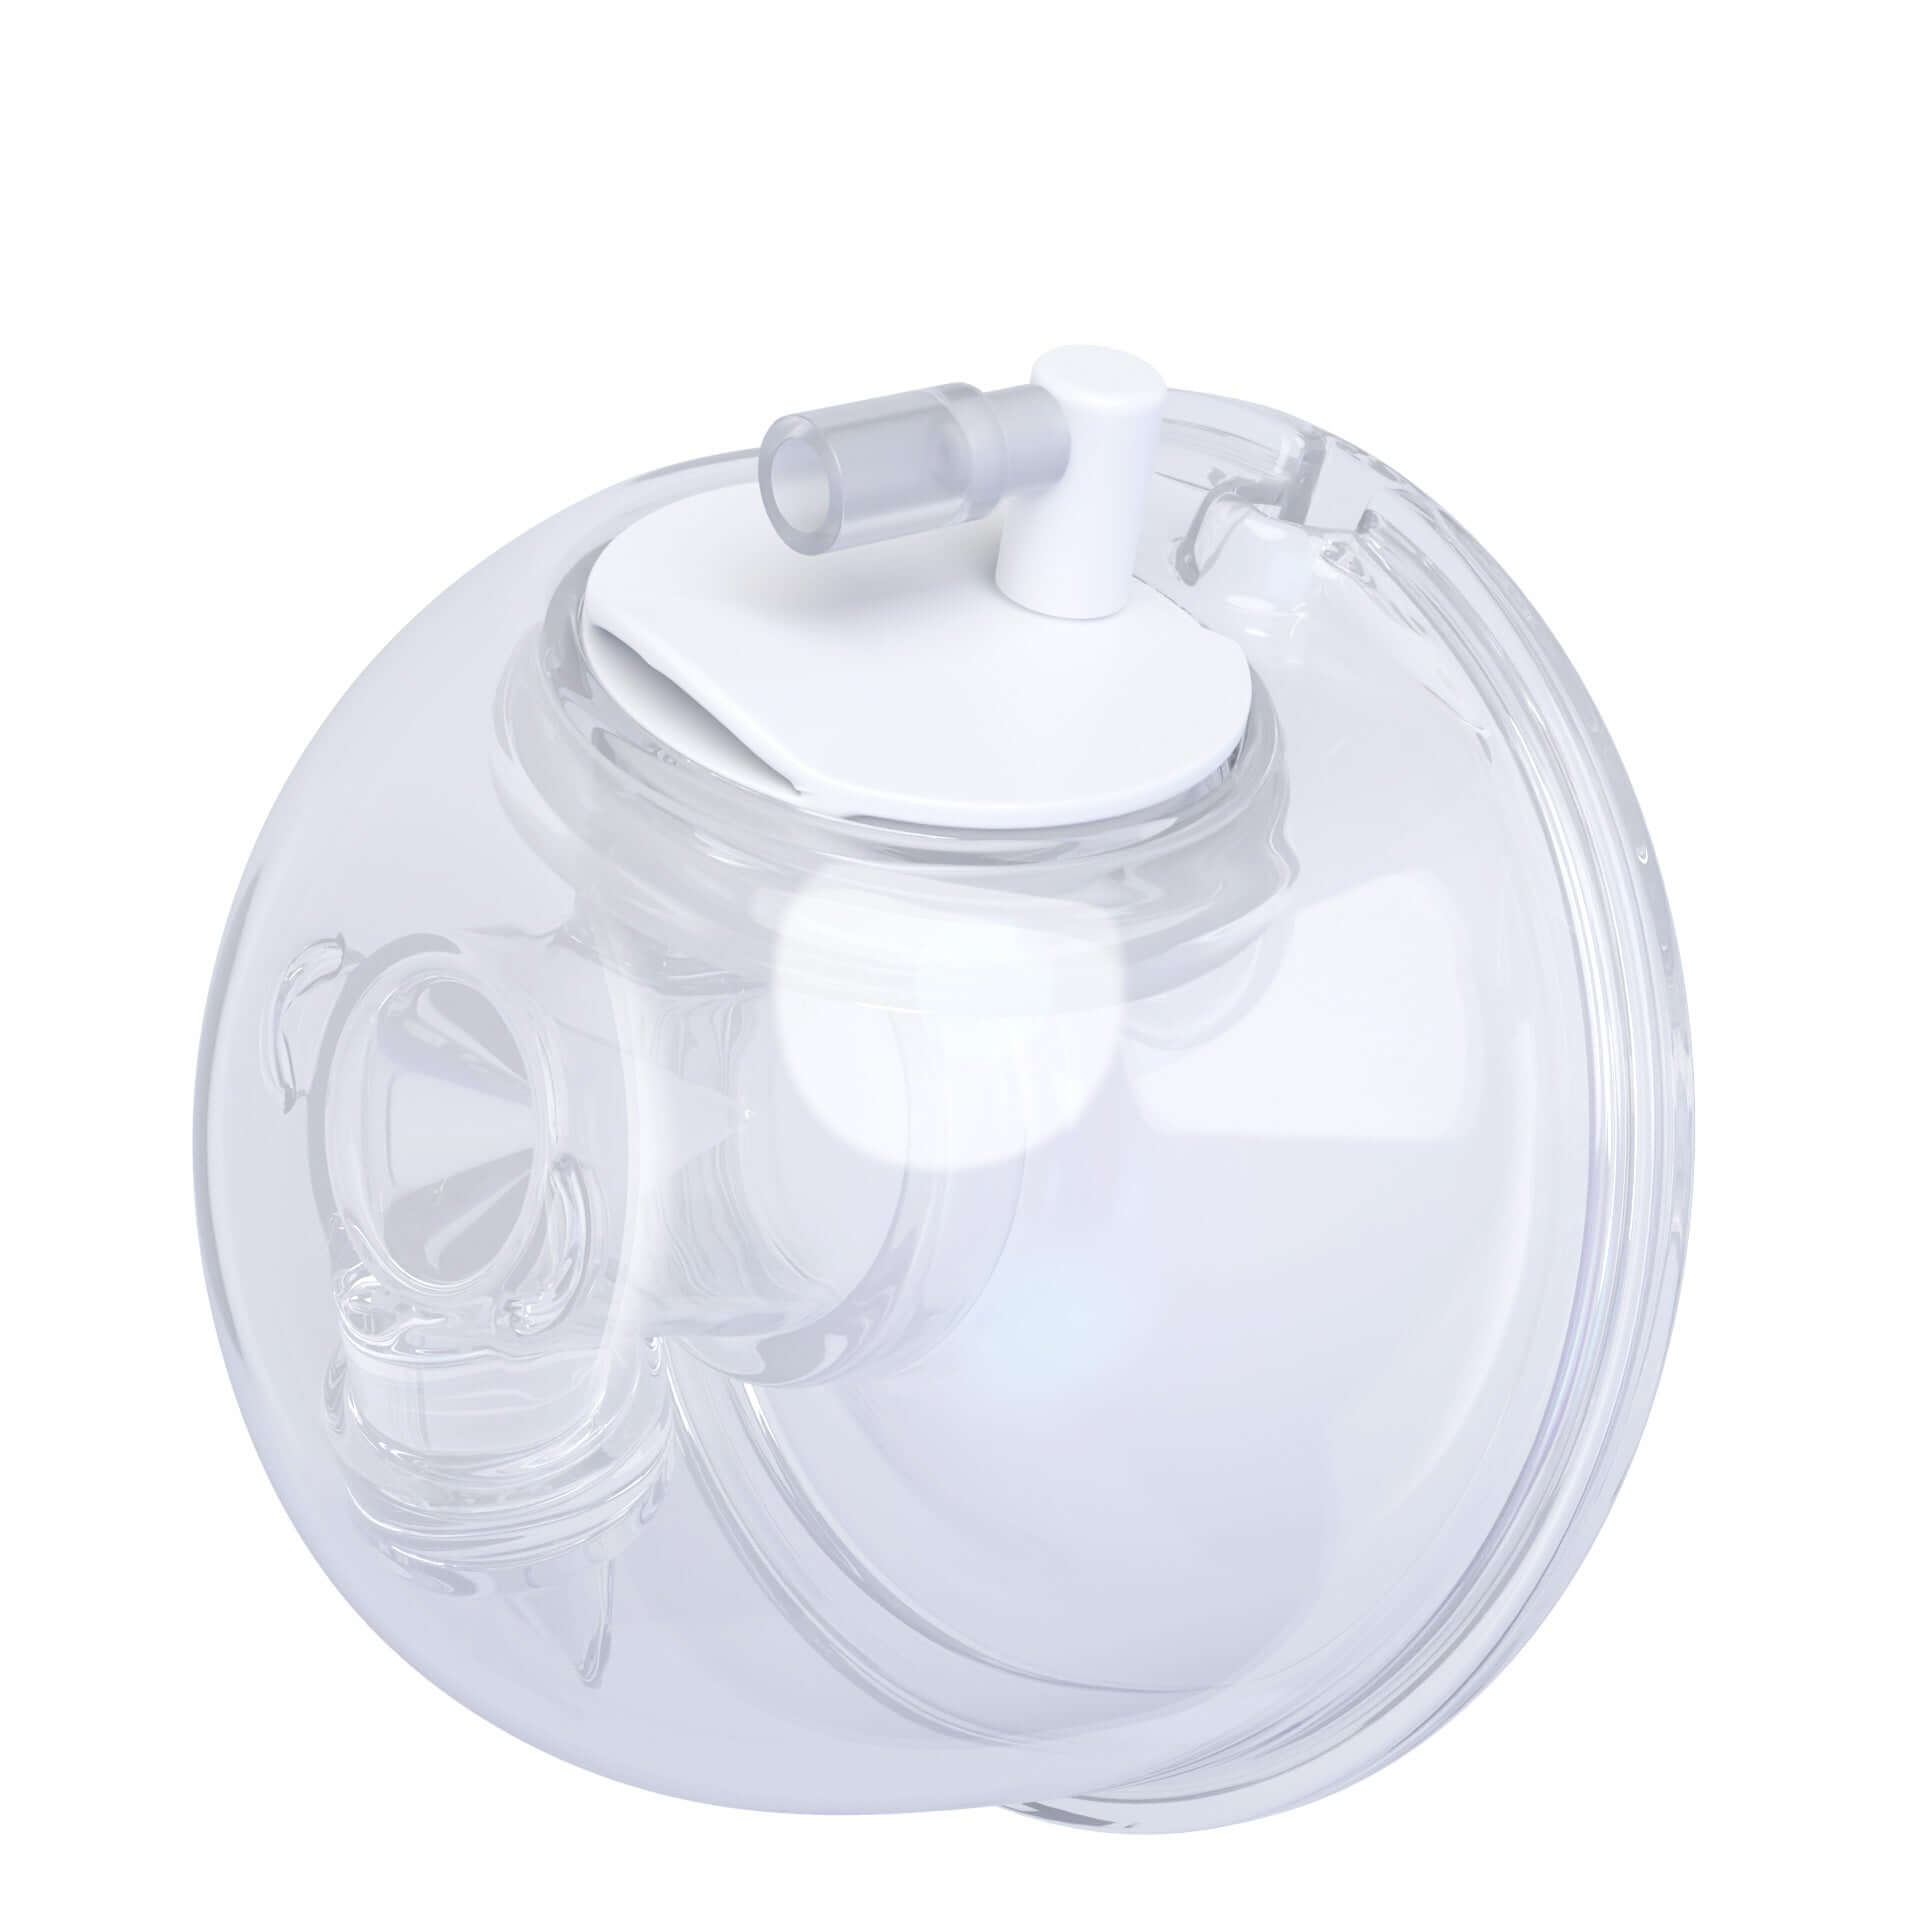 Spectra 9 Plus Breast Pump and Cara Cups - The Breastfeeding